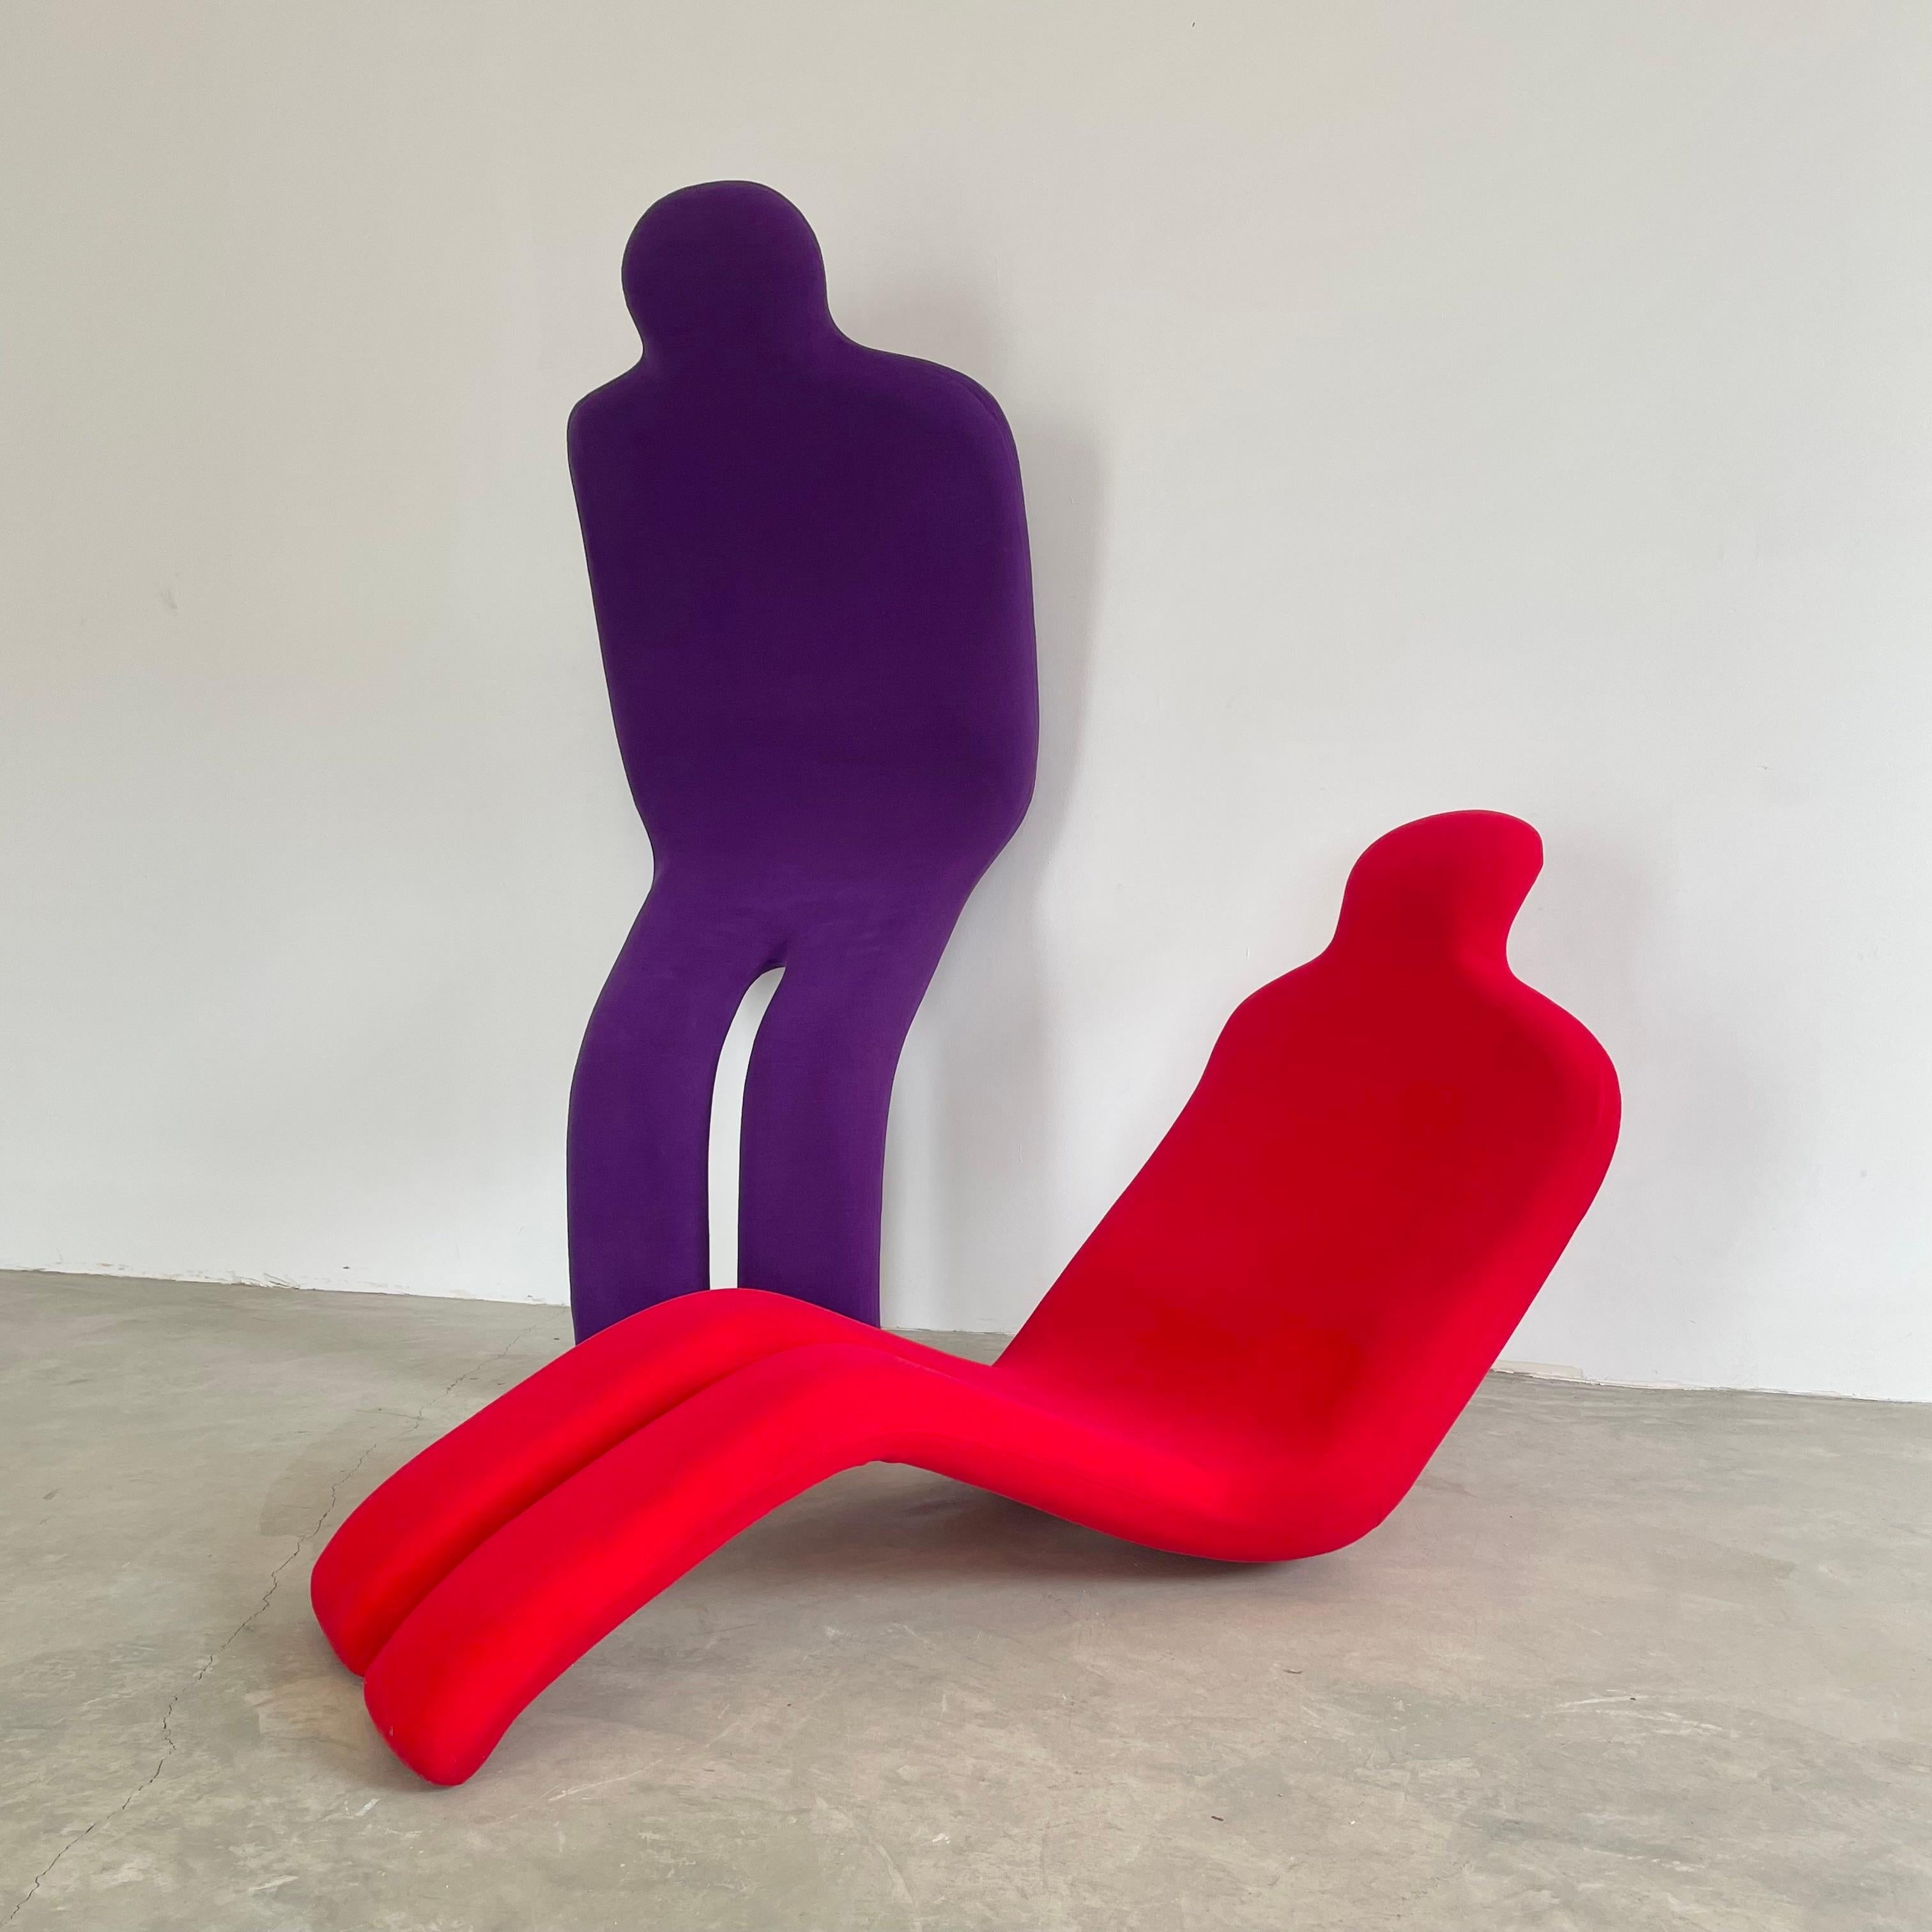 With its anthropomorphic form, Olivier Mourgue based his Bouloum Lounge Chair on the Silhouette of one of his friends and christened it with the friend’s childhood nickname. 

Born in Paris, France in 1939, Morgue was a French Industrial designer